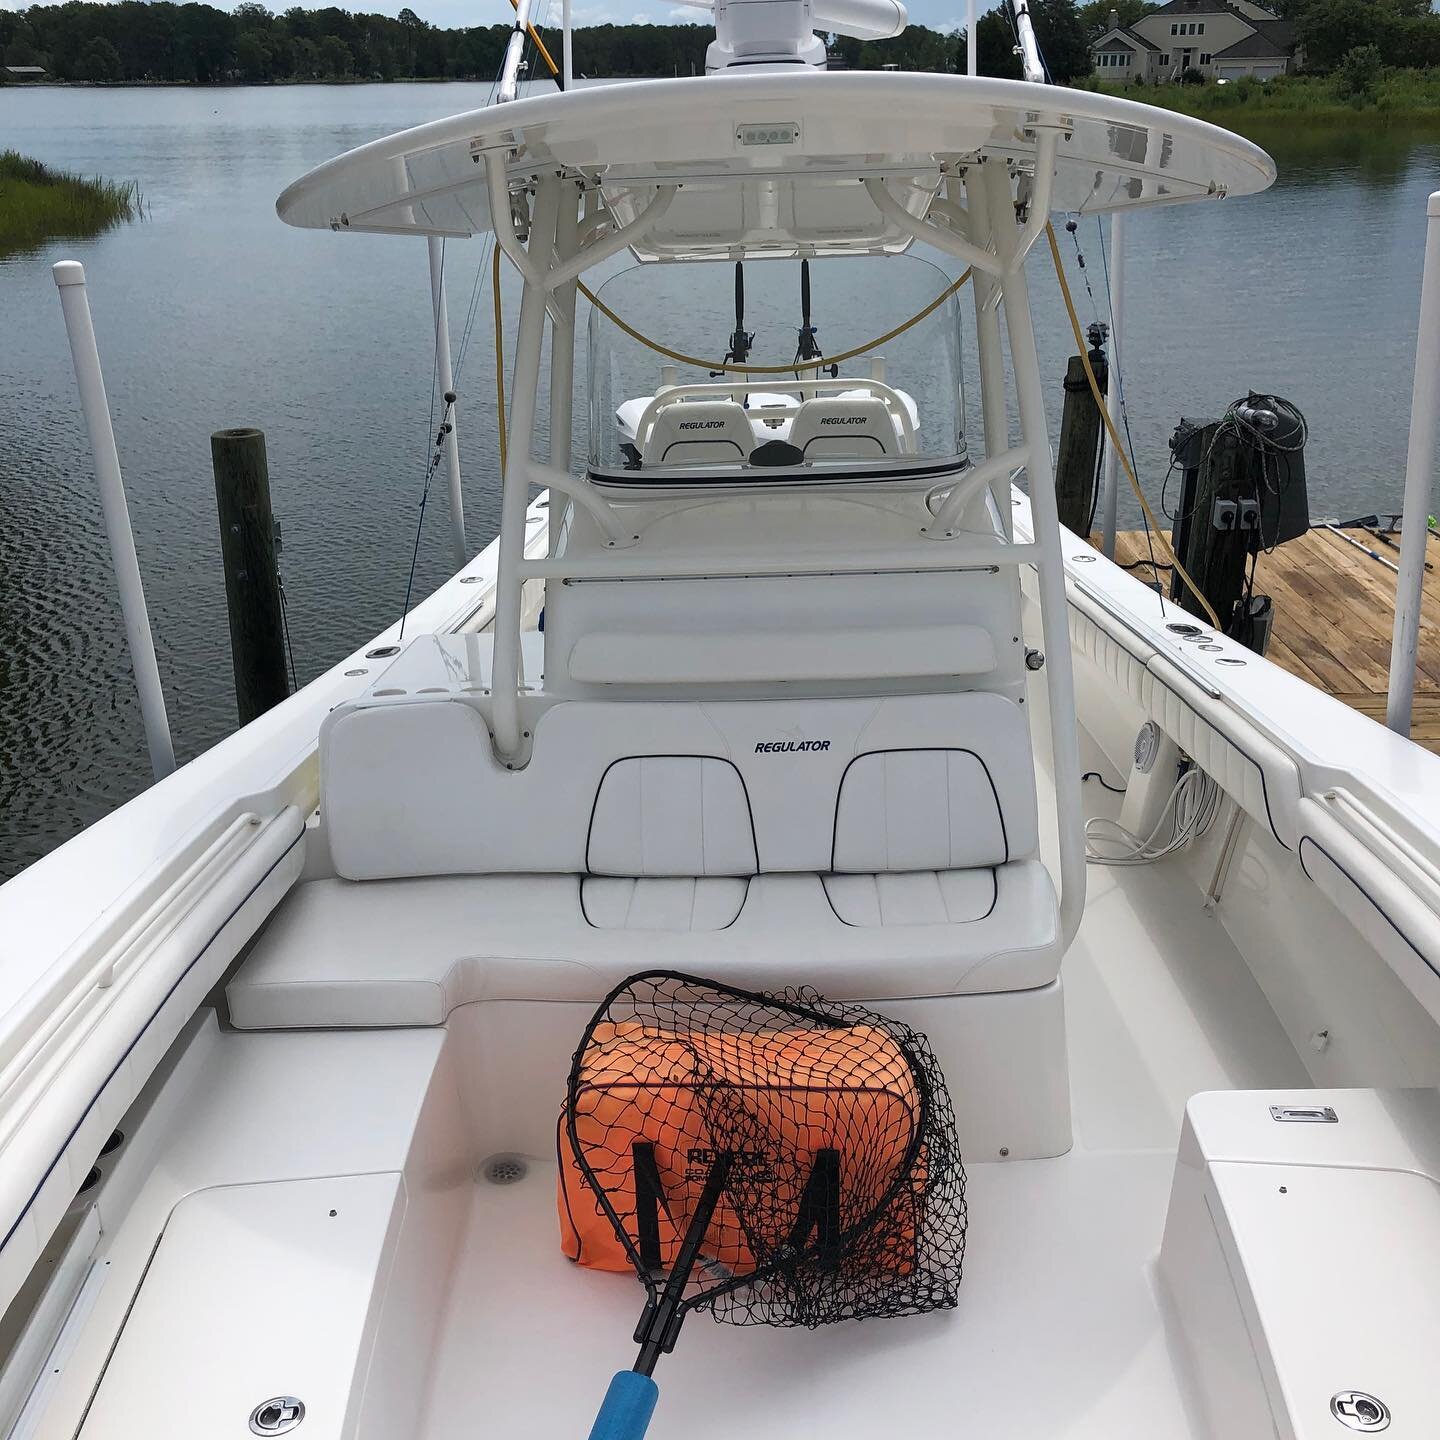 Does your boat need a good wash now that Rock season is over?
NNK SHINE offers Complete Maintenance Washes that include:
-Hand wash and dry
-All non-skid sealed
-Polish stainless
-Polish/seal all glass/curtains

Don&rsquo;t winterize a dirty boat, ou